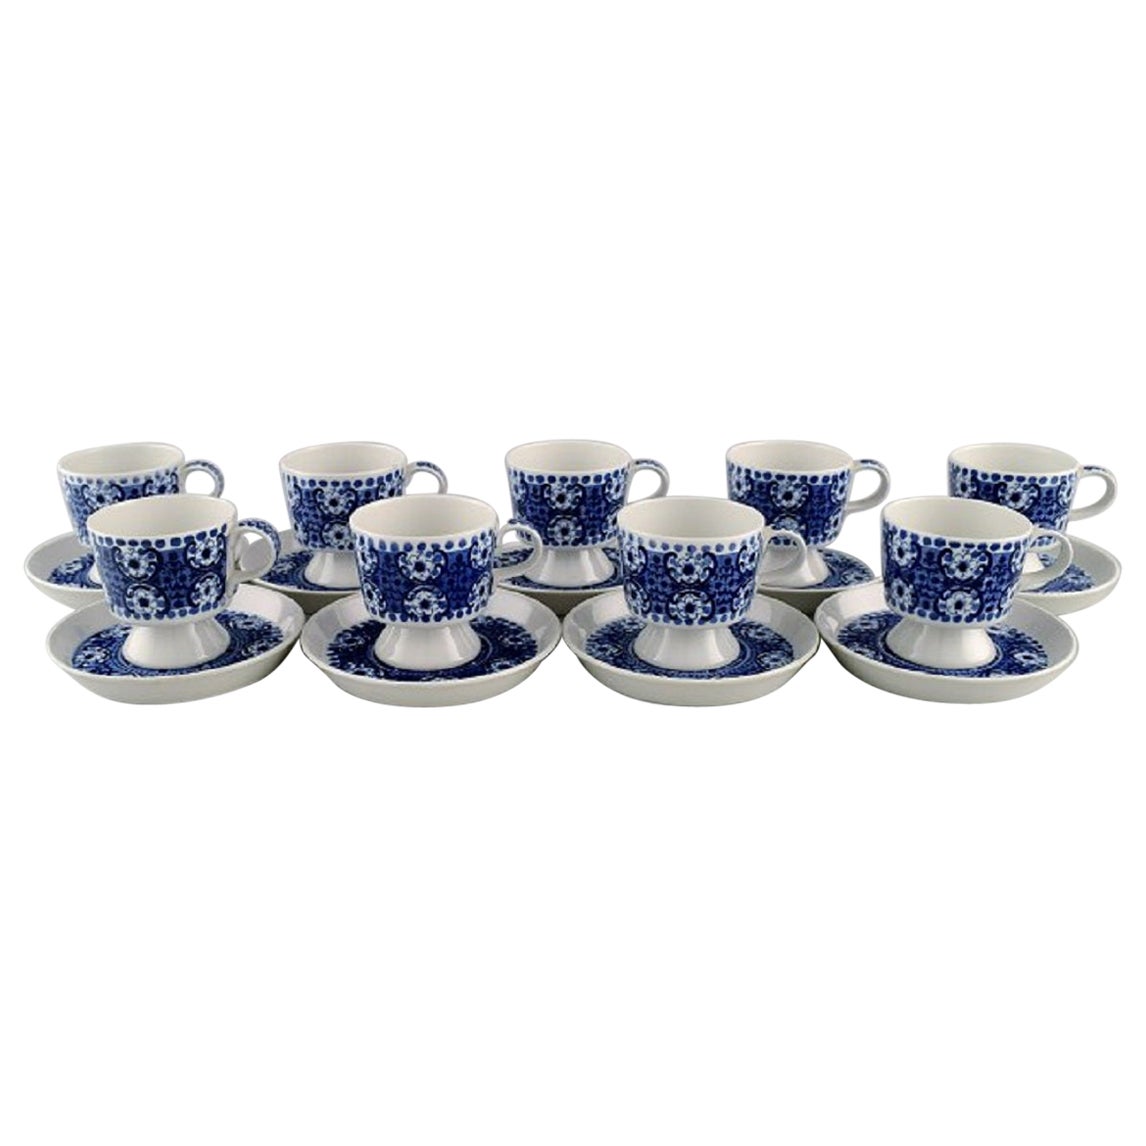 Raija Uosikkinen for Arabia, 9 Ali Porcelain Coffee Cups with Saucers For Sale